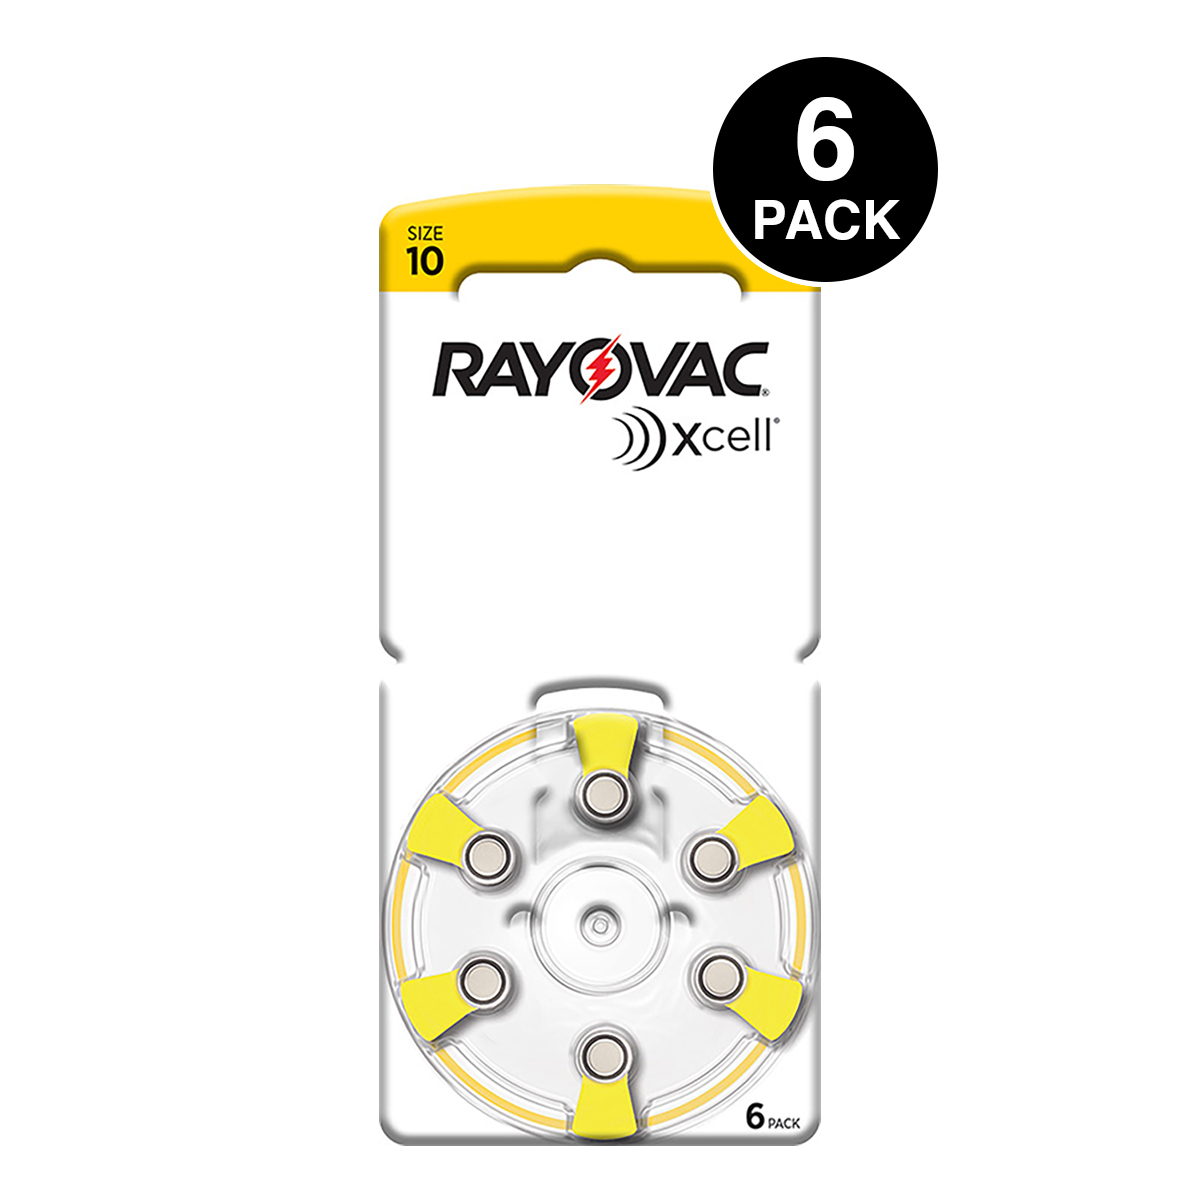 Xcell (Made By Rayovac) Size 10 Hearing Aid Batteries (6 pcs) 